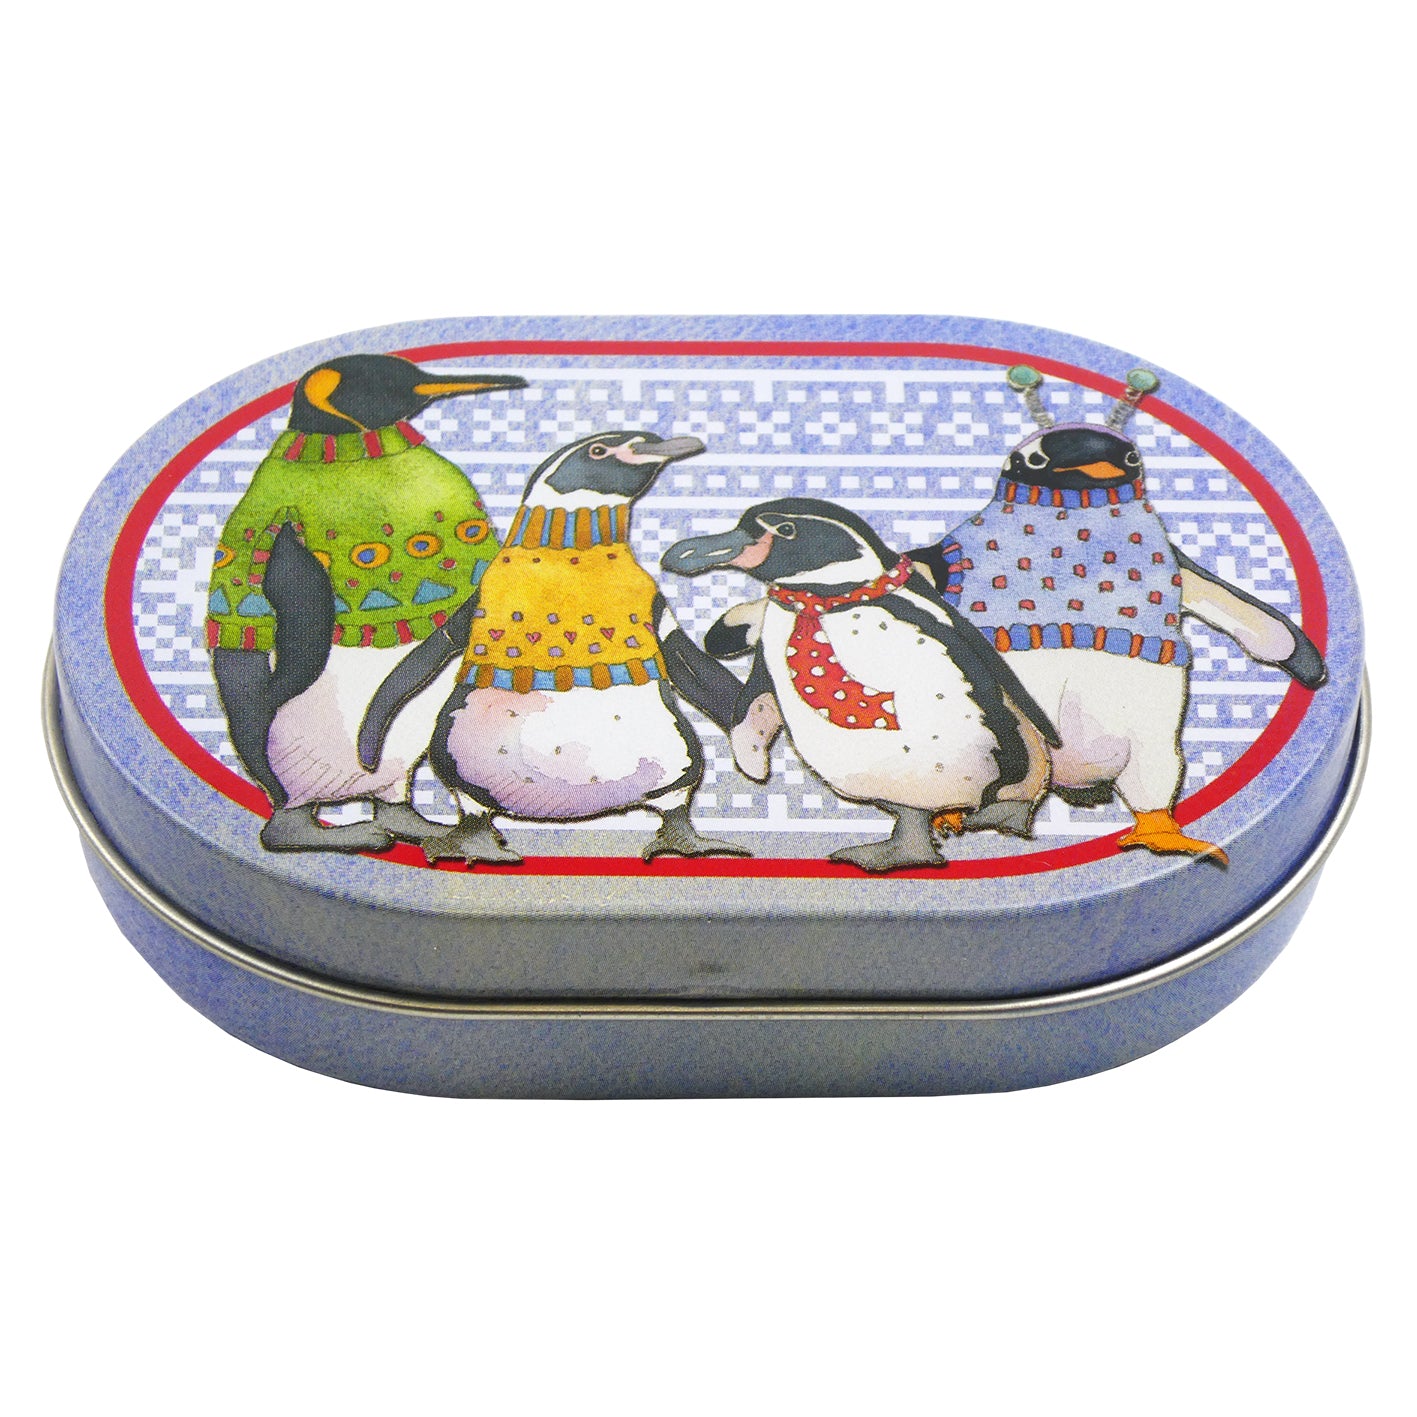 Light blue oval tine with Penguins in Pullovers design on lid.